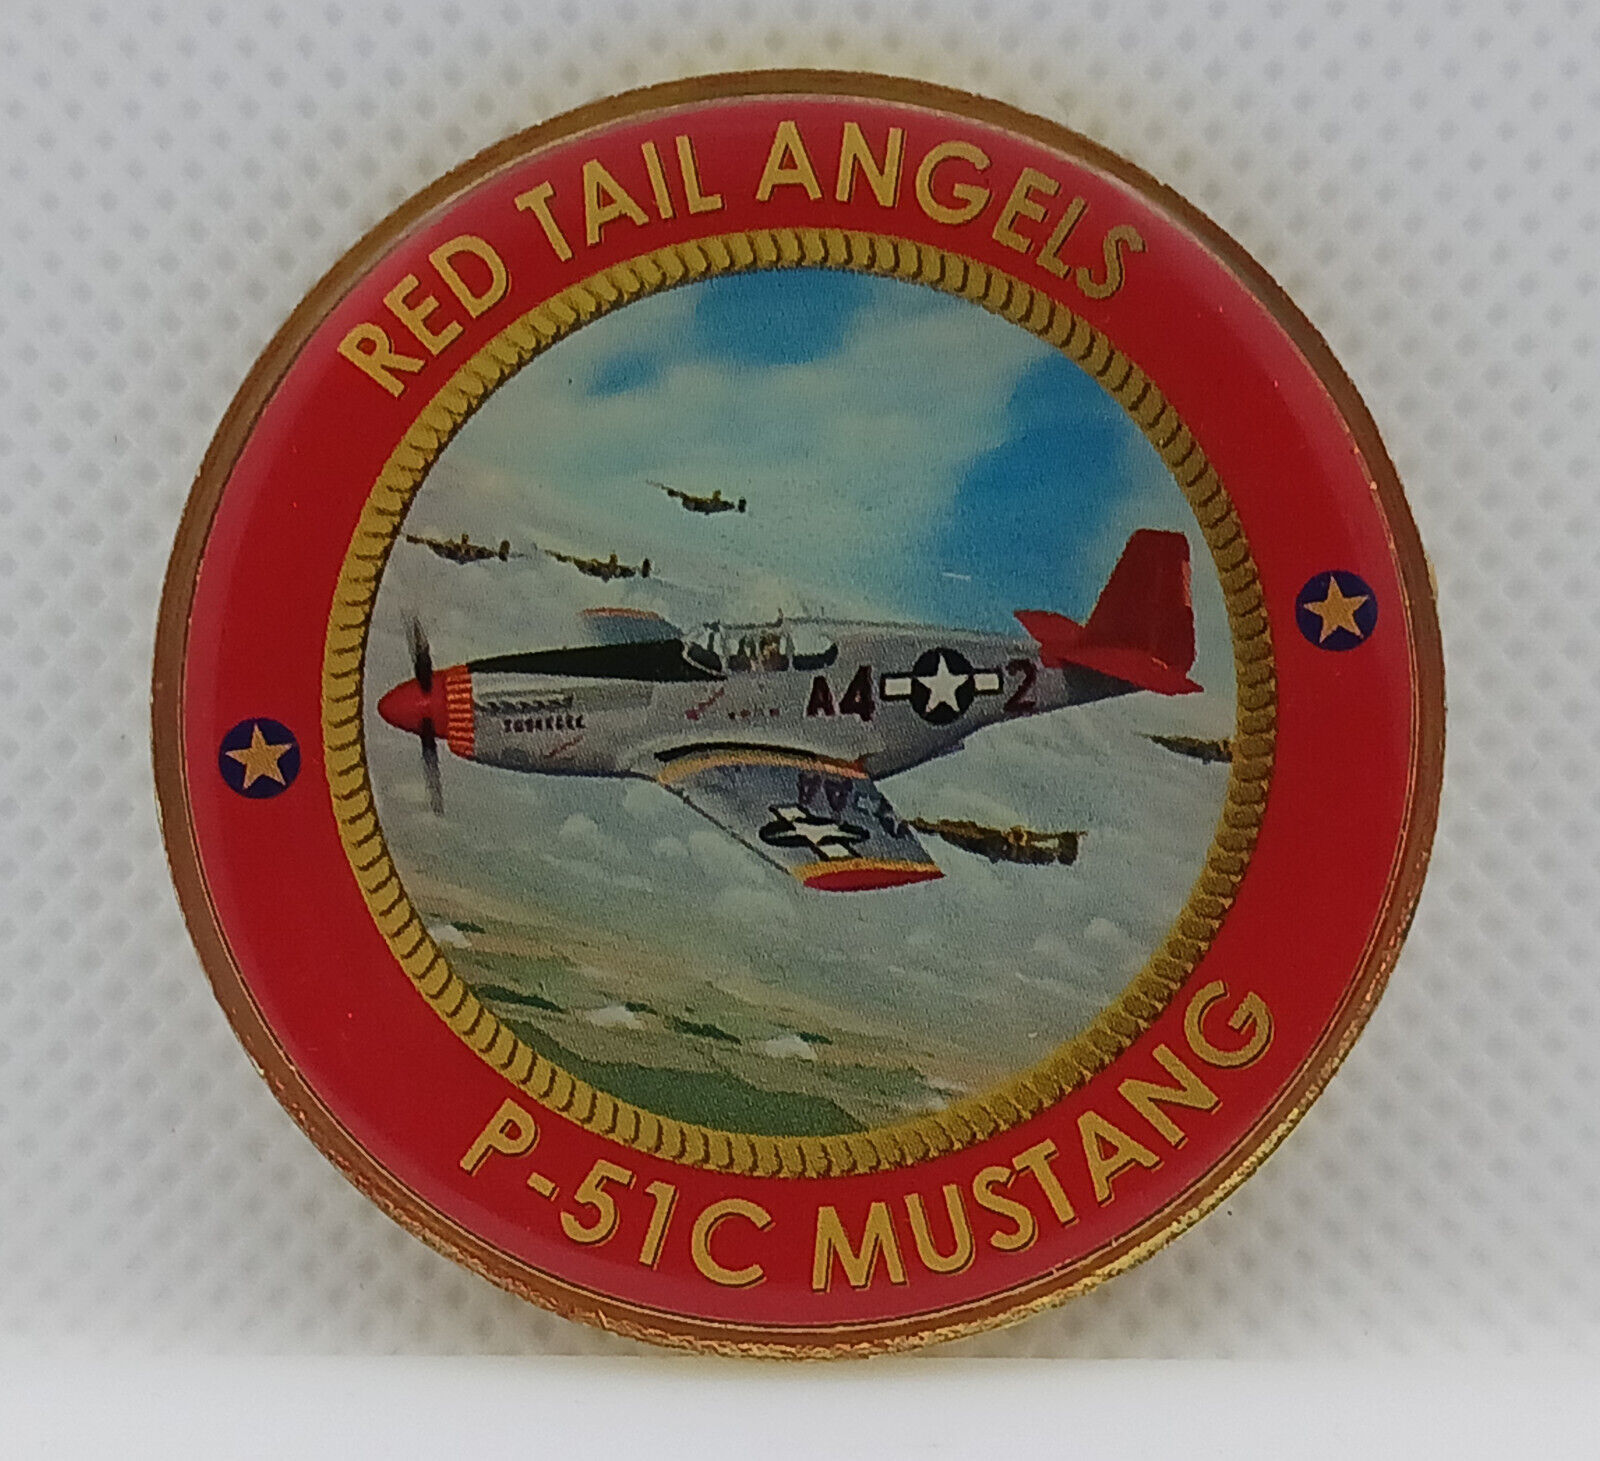 USAF Tuskegee Airmen Red Tails P-51C Mustang 2017 Coin